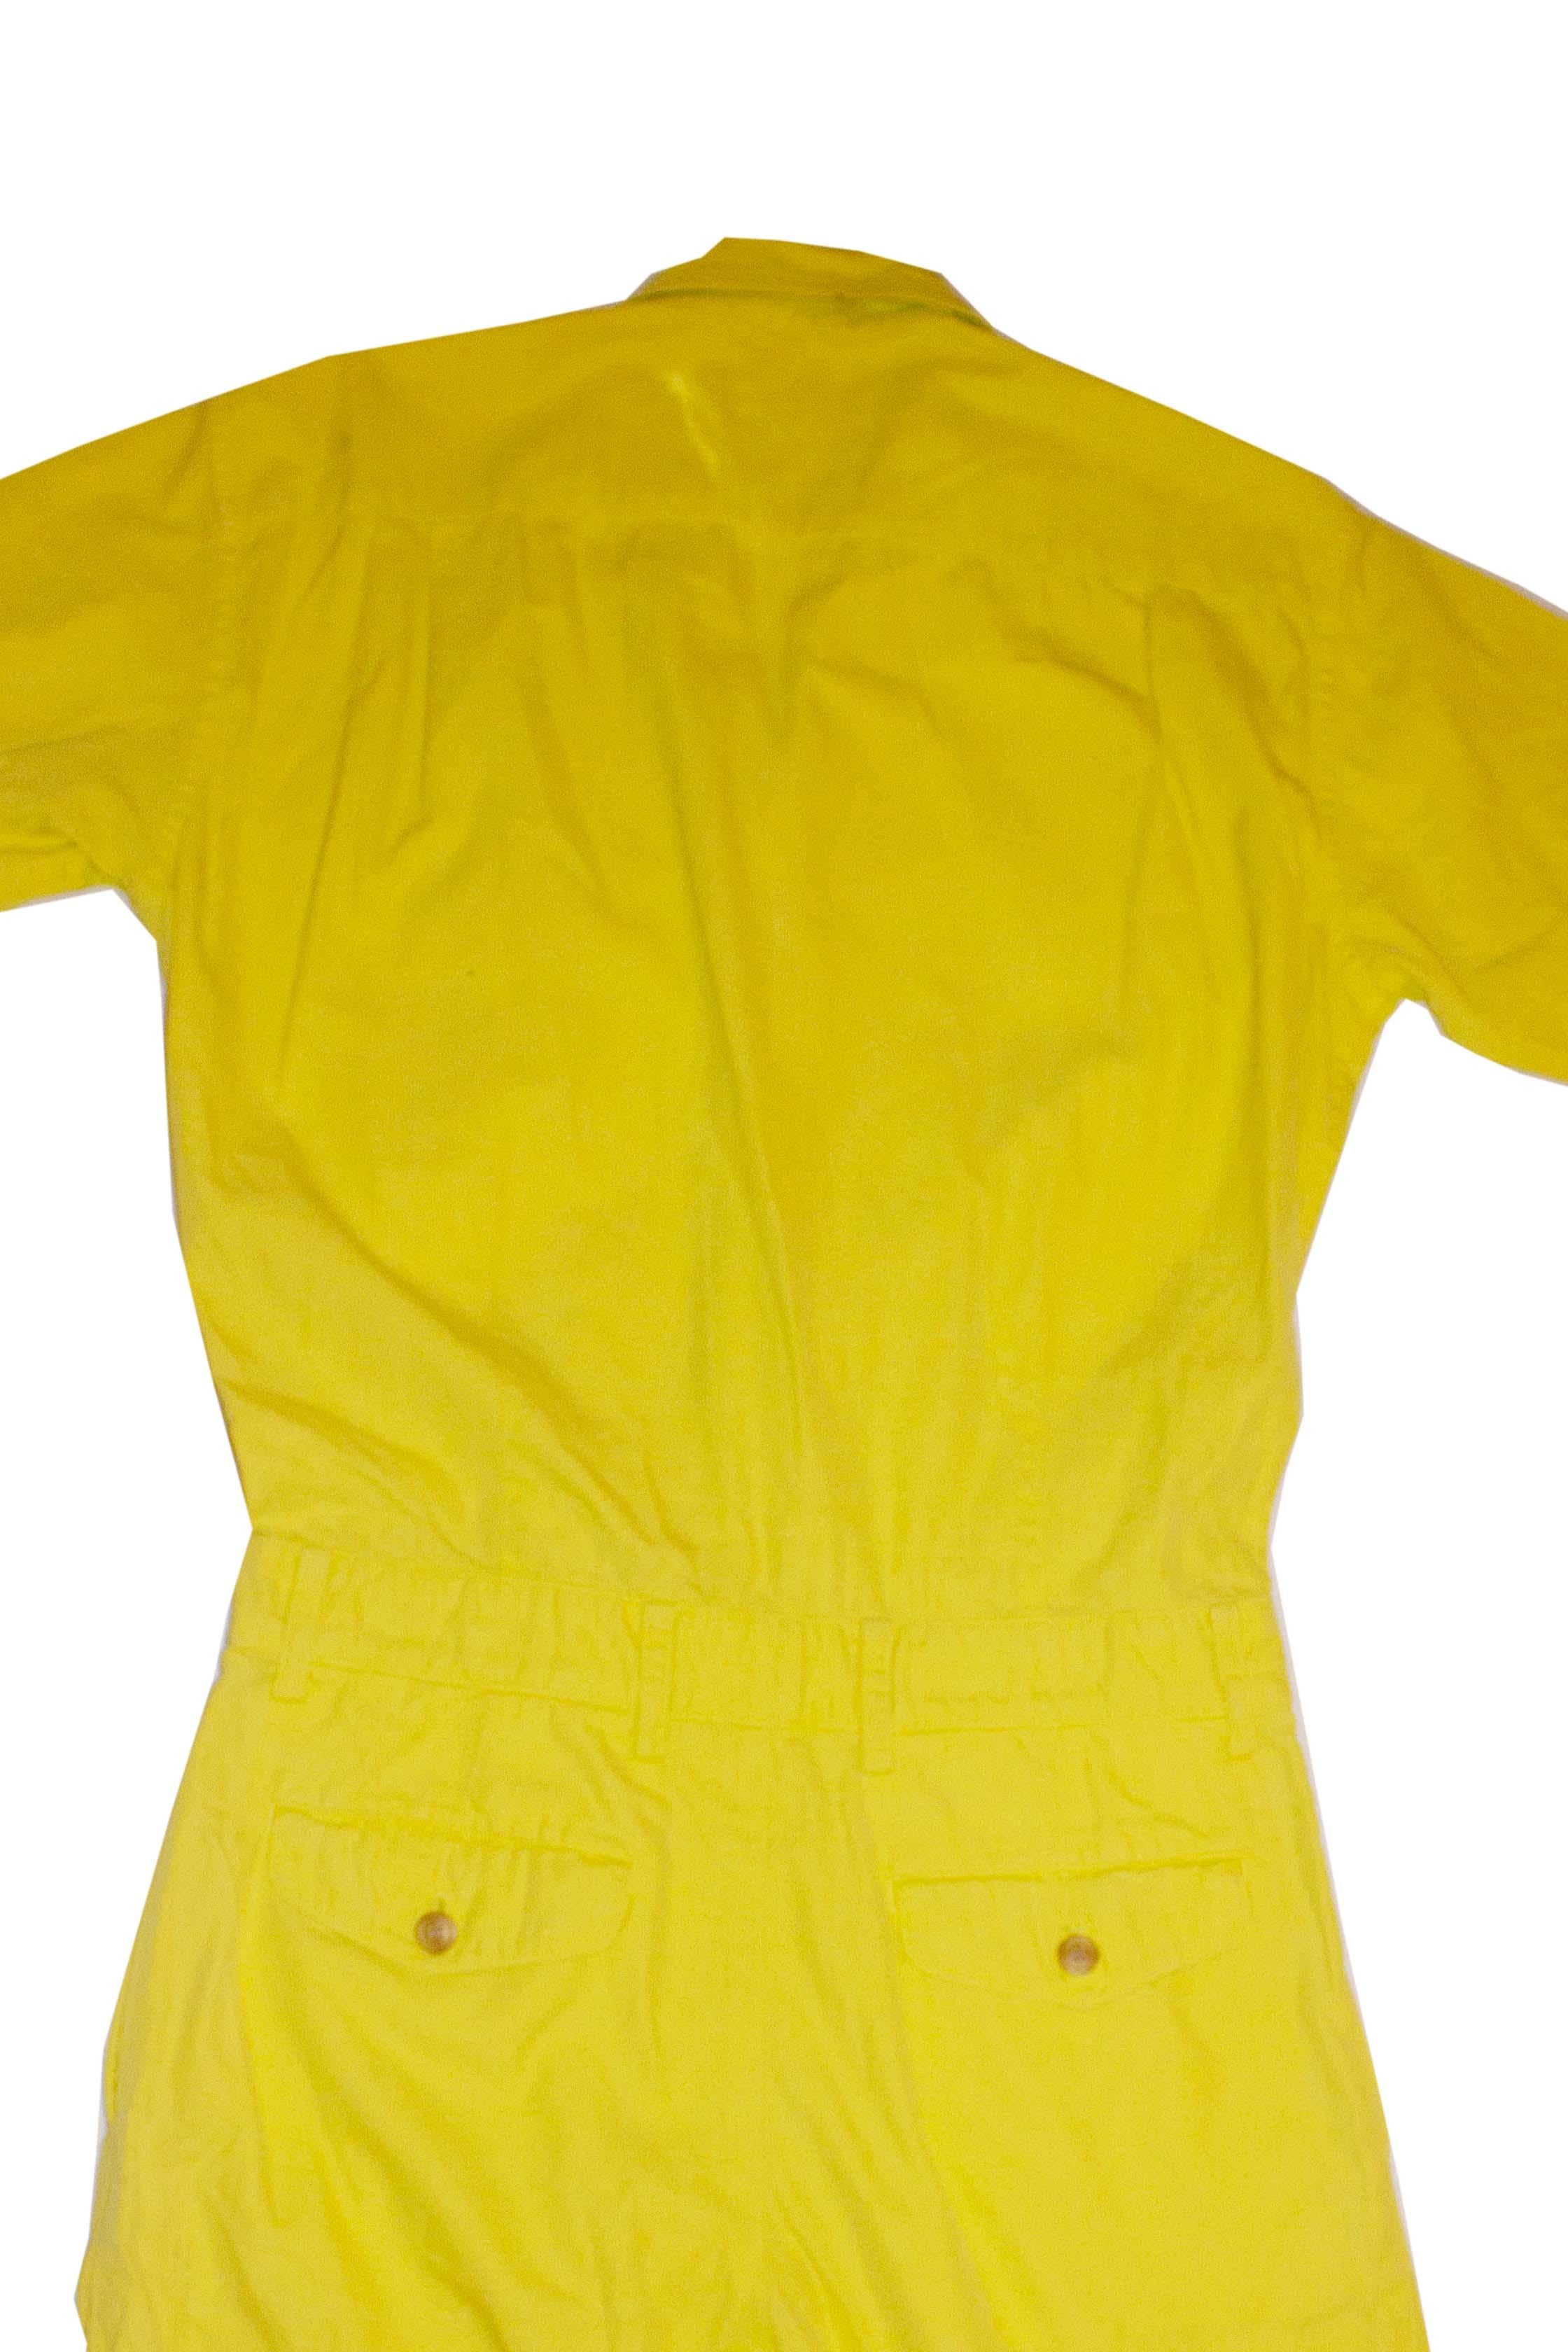 A headturning vintage cotton jumpsuit  by Issey Miyake mens line. In a yellow cotton, the jumpsuit has short sleaves , left hand side chest pocket, button fly, belt hoops,  and a pocket on either side. 
ME91 - F1640 Measurements: chest 44''. waist